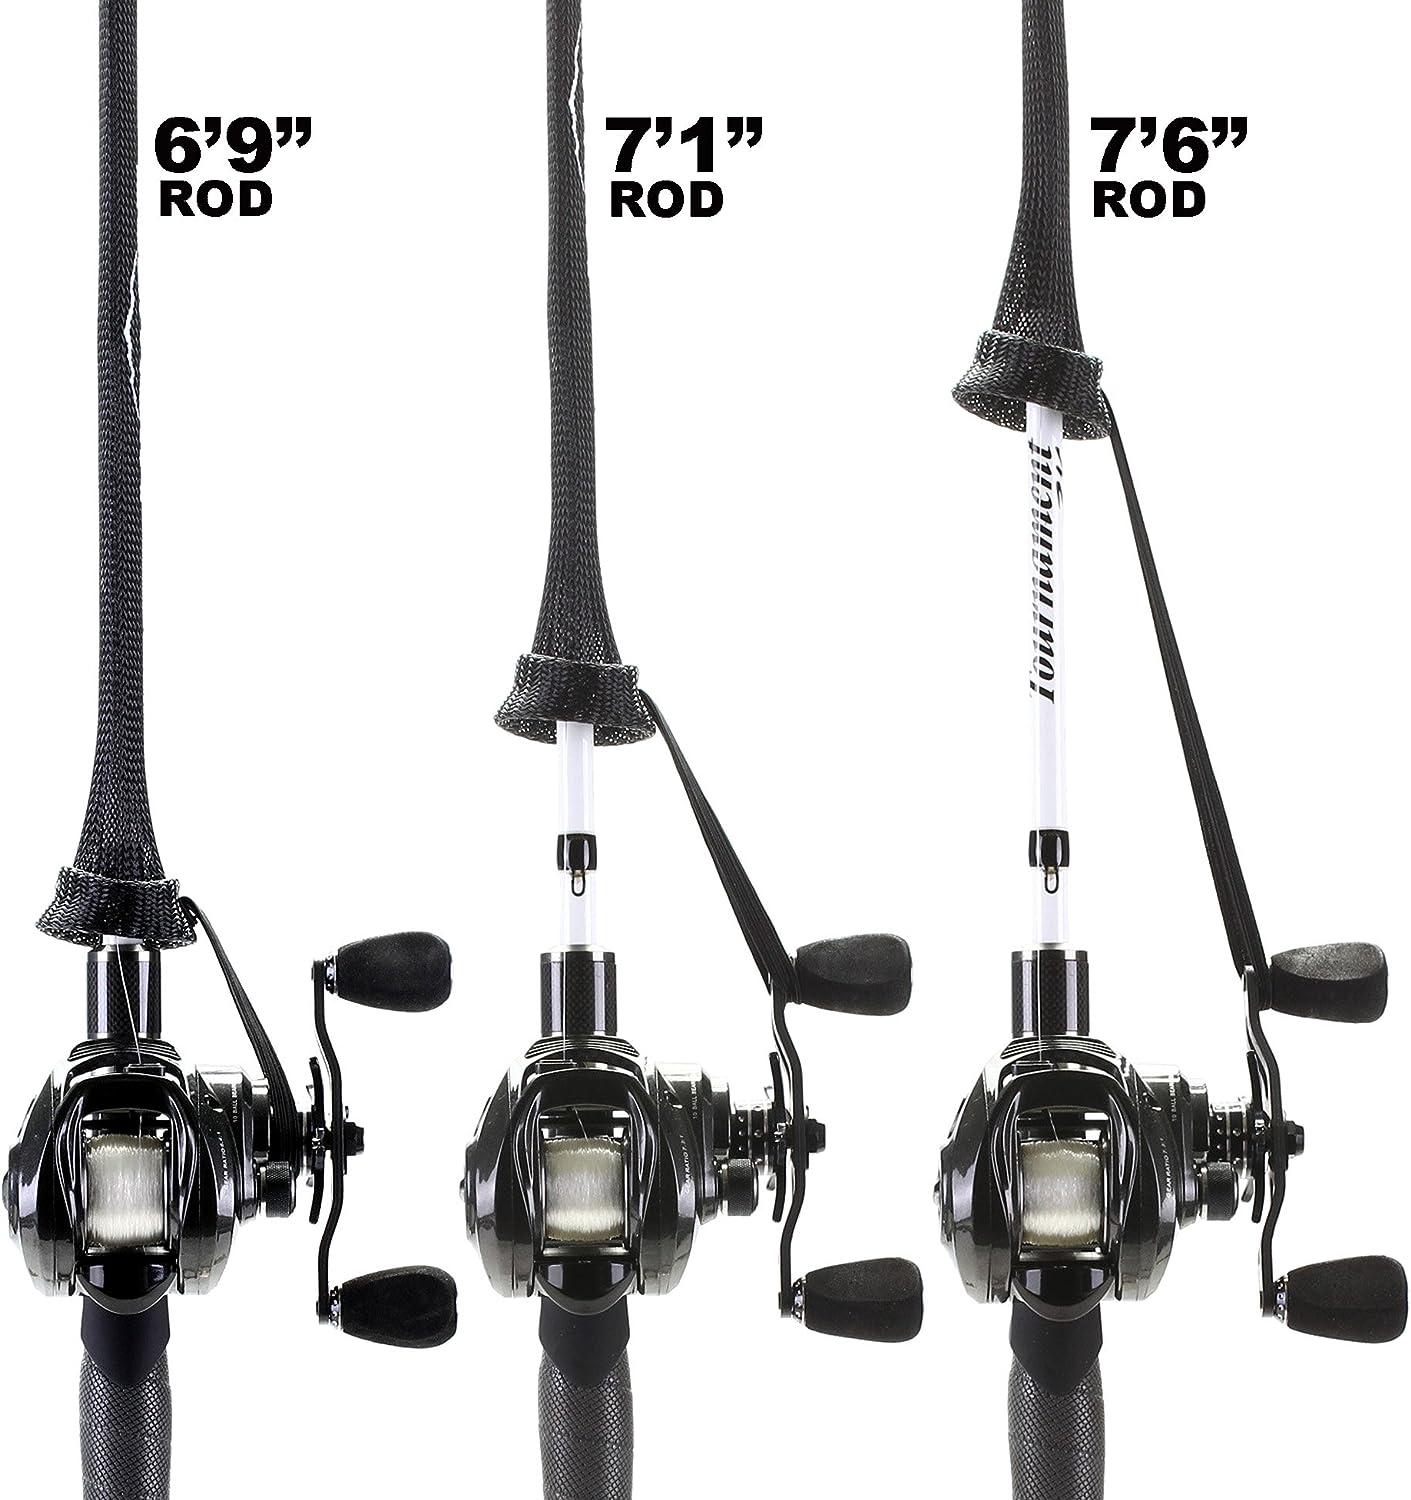 Midwest Outfitters Rod Socks Fishing Rod Sleeve Cover -6Pack- Rod Sock Fishing  Pole Covers for Spinning Baitcaster Fishing Pole Sizes - Rod Cover Comes in  Multiple Sizes and Colors Black Baitcast 6'6-7'6